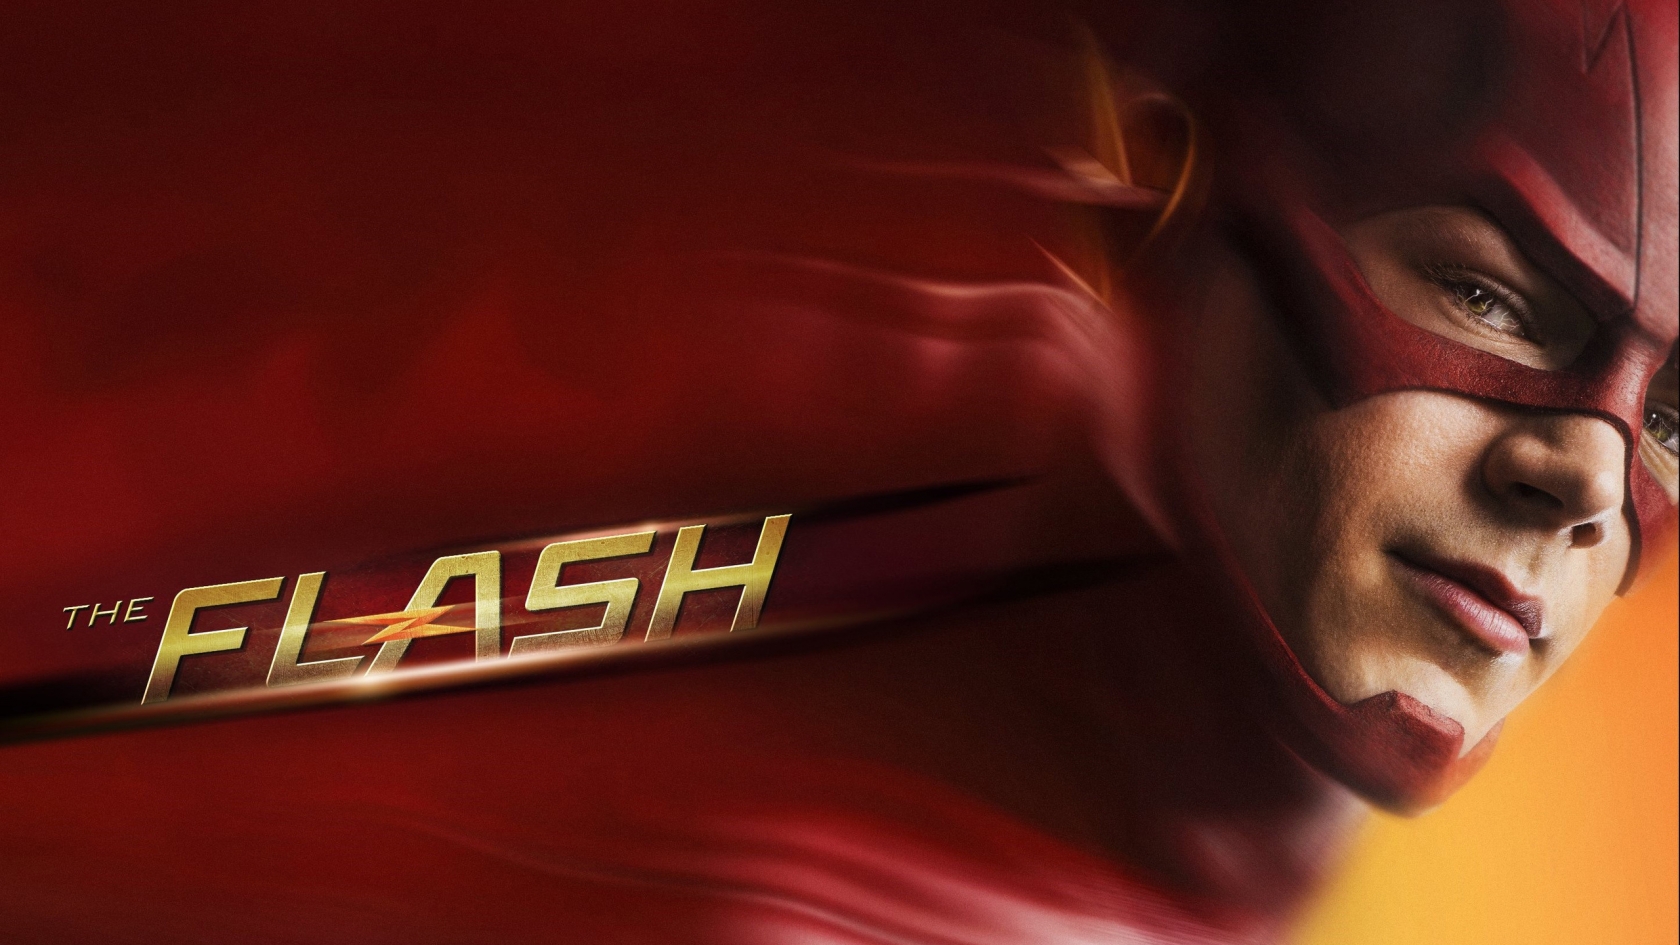 The Flash TV Series for 1680 x 945 HDTV resolution